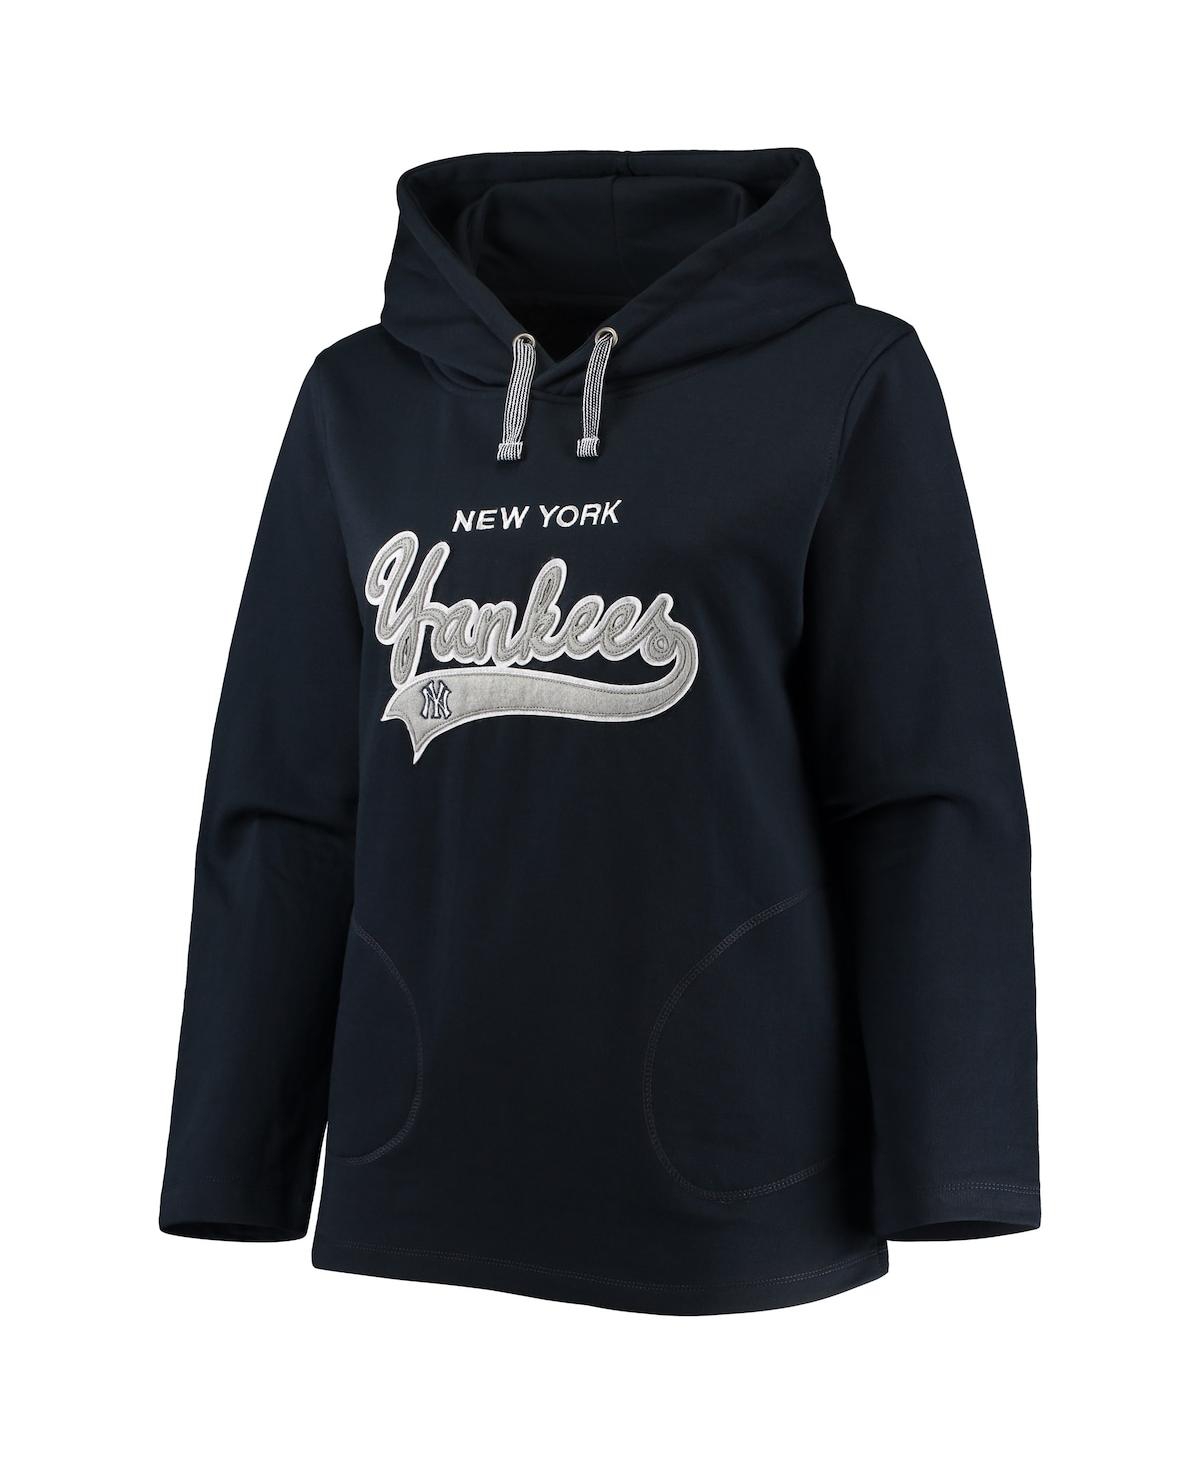 Shop Soft As A Grape Women's  Navy New York Yankees Plus Size Side Split Pullover Hoodie